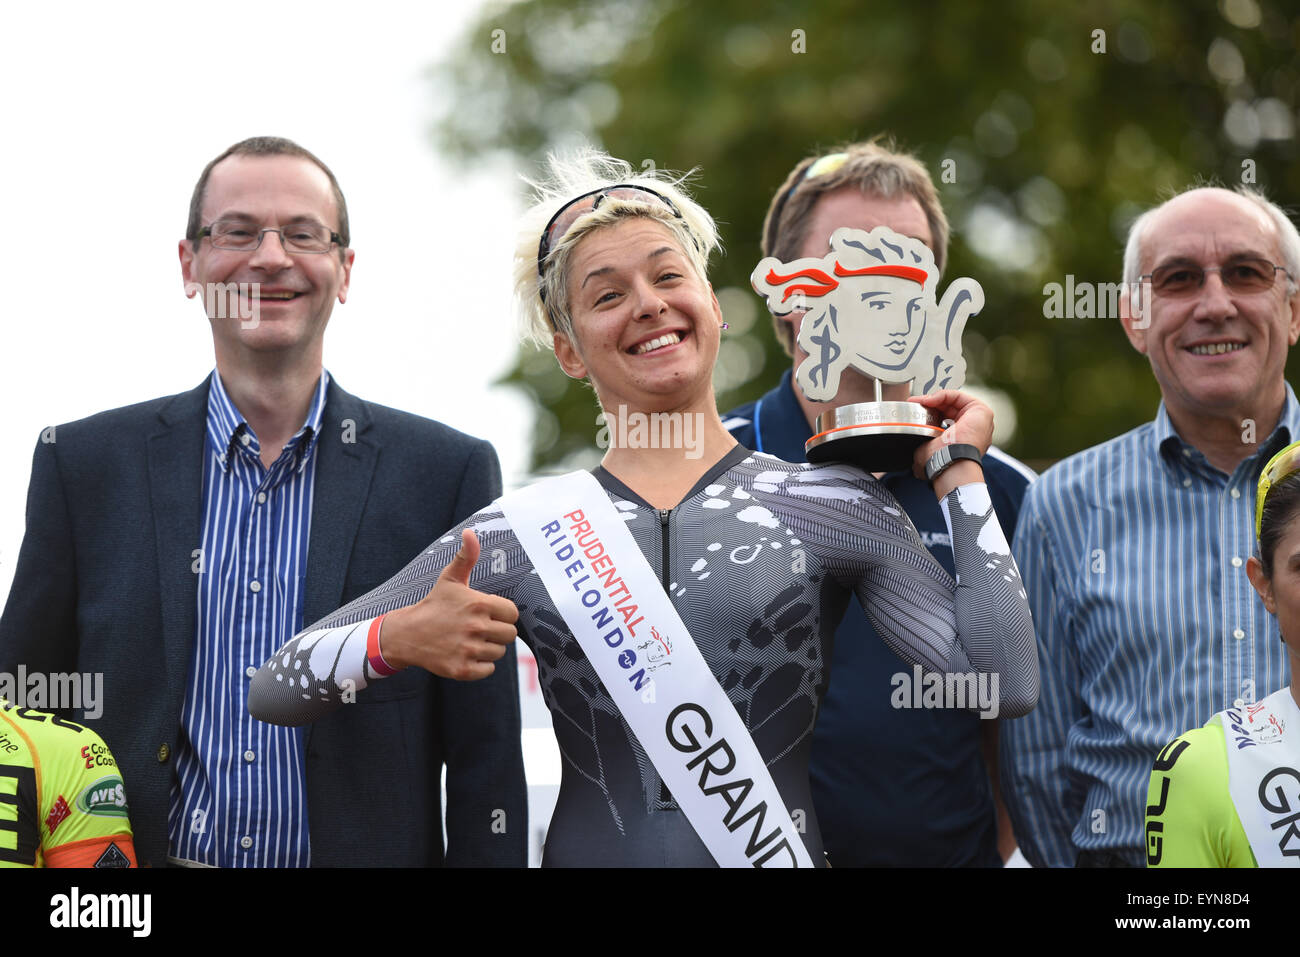 London, UK. 1st August, 2015. Barbara Guarischi (Velocio Sports) is seen on the podium following her win at the Prudential RideLondon Grand Prix at The Mall, London, United Kingdom on 1 August 2015. The race, which started at Horse Guards Parade and finished on The Mall, featured many of the world's top female professional cyclists. Credit:  Andrew Peat/Alamy Live News Stock Photo